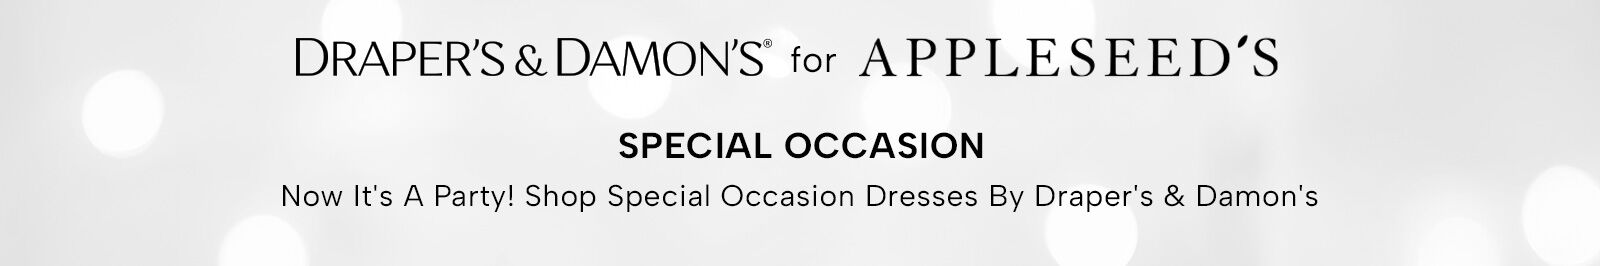 Draper's & Damon's for Appleseed's - Special Occasion. Not it's a party! Shop Special Occasion Dresses by Draper's & Damon's